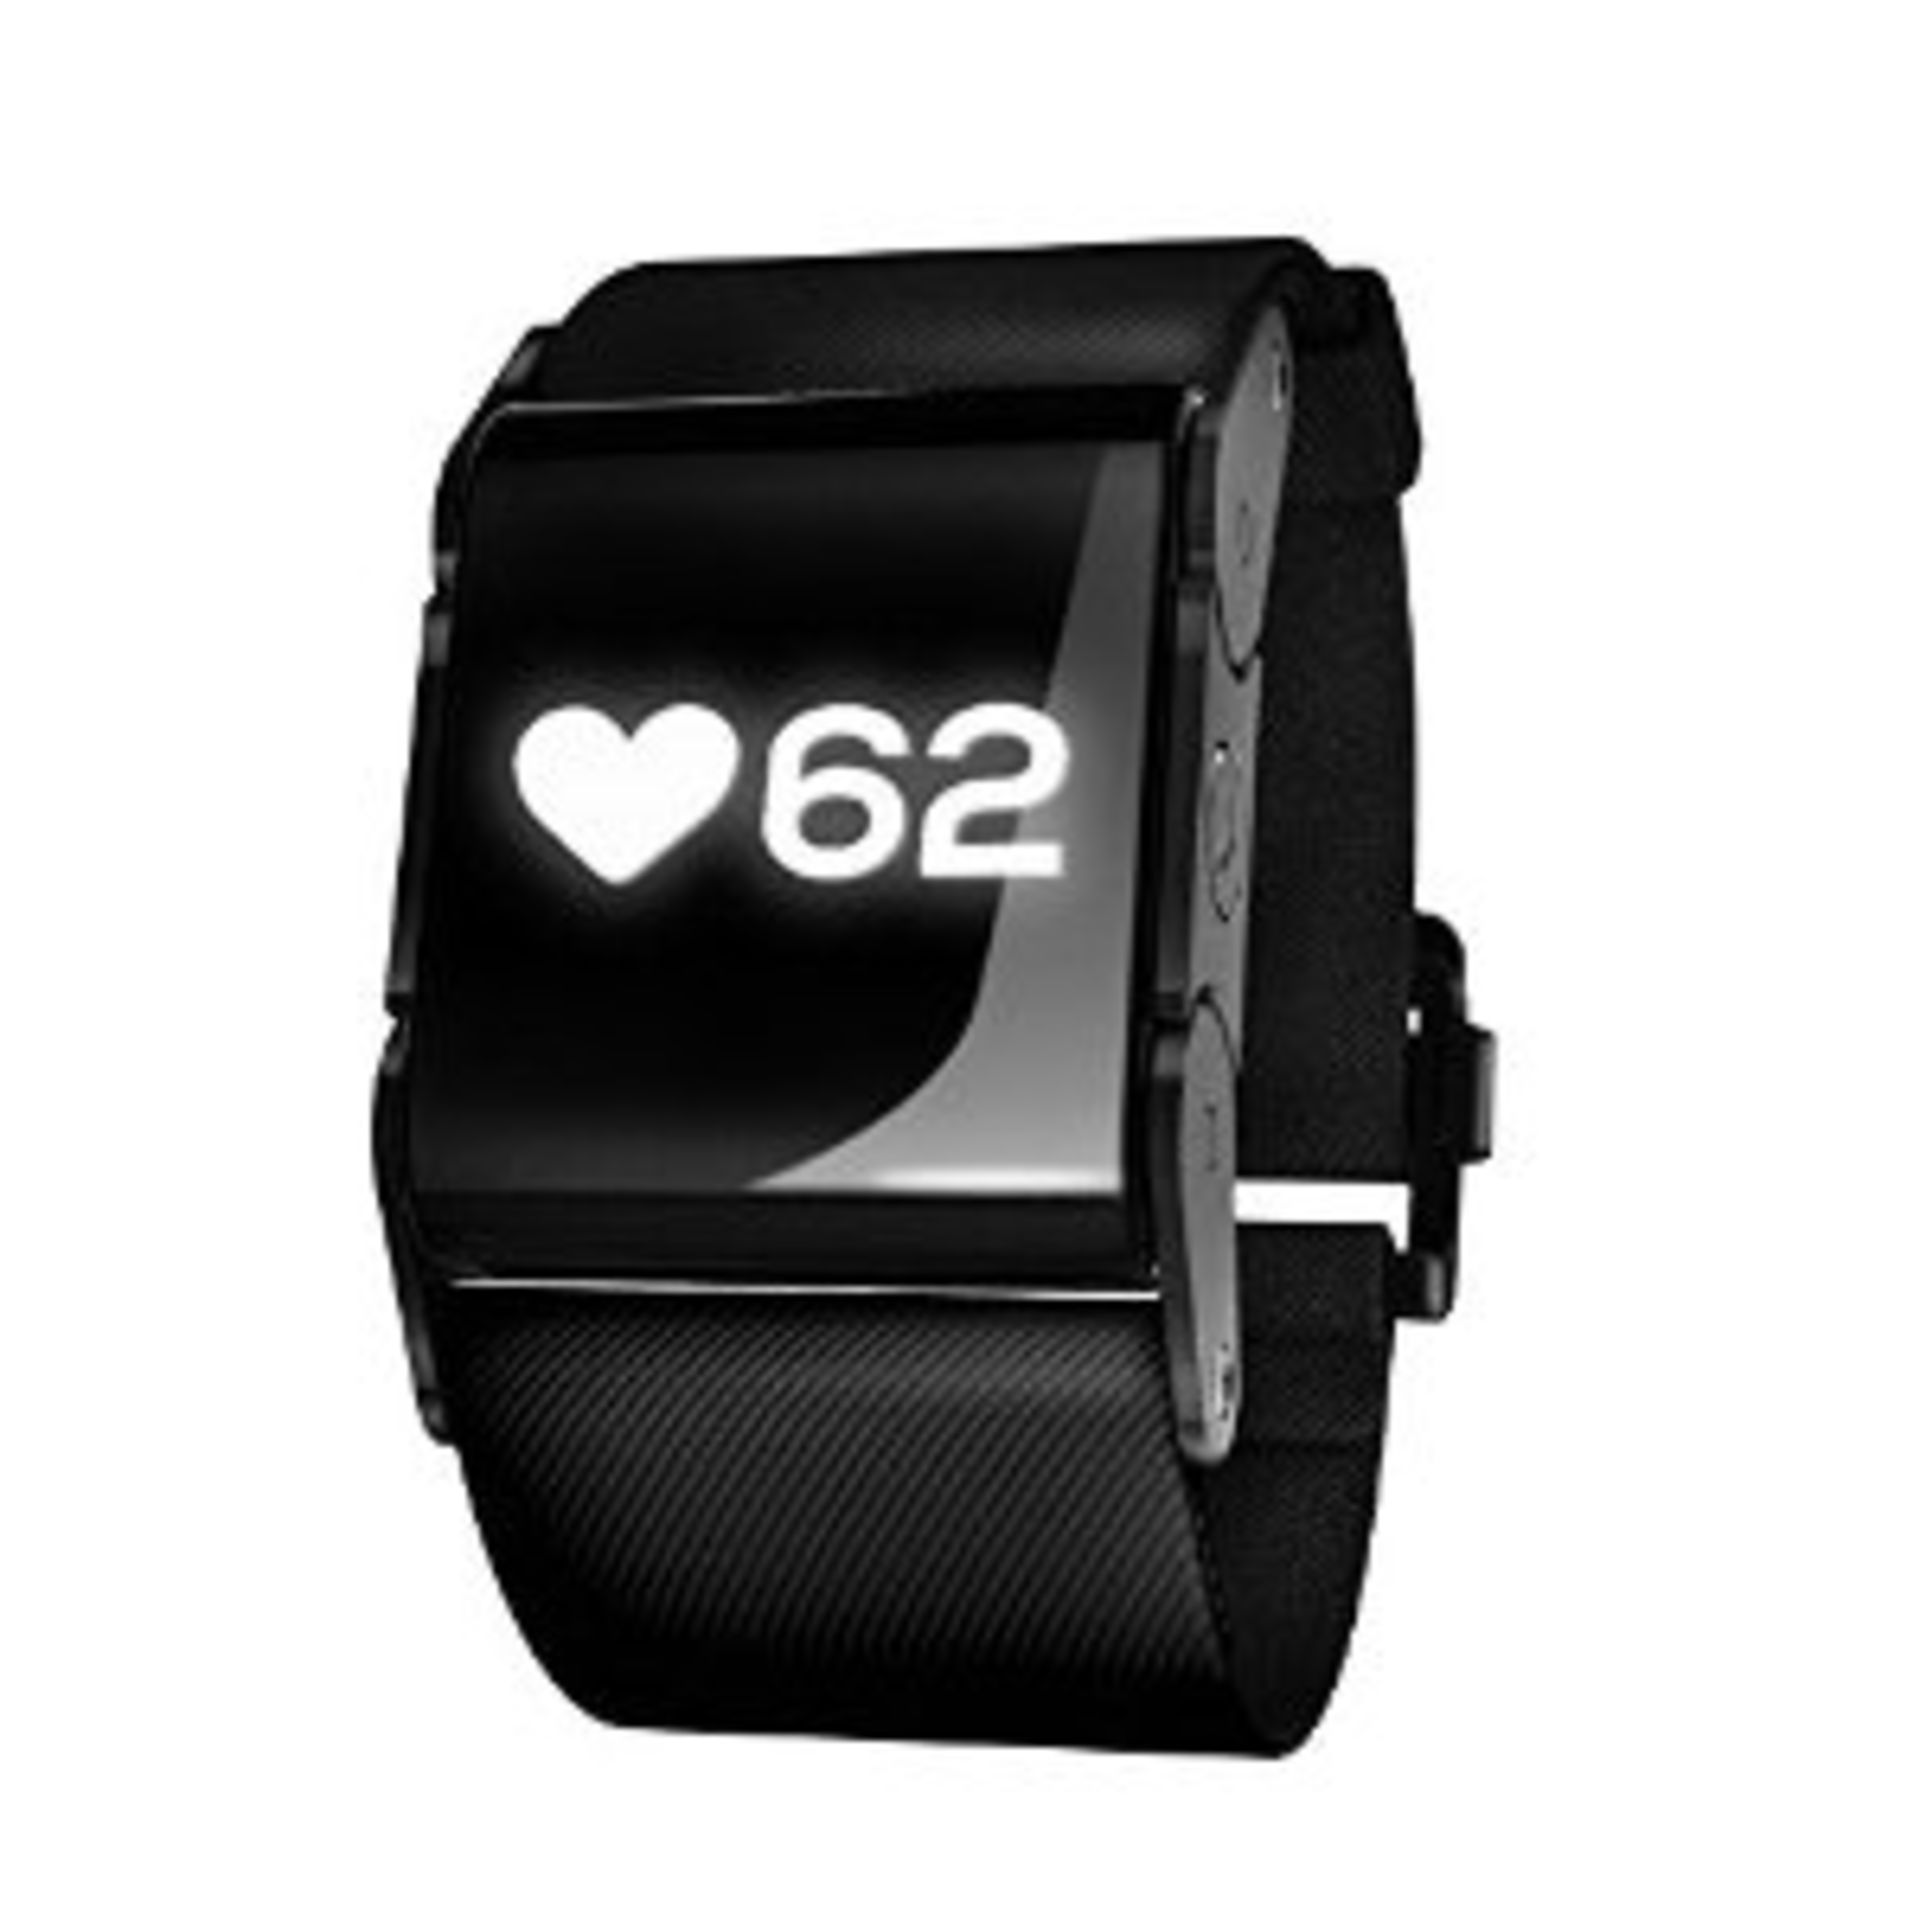 V Brand New Pulse On Heart Rate Wrist Band - App Connectivity - Measures Training Effect - Fitness